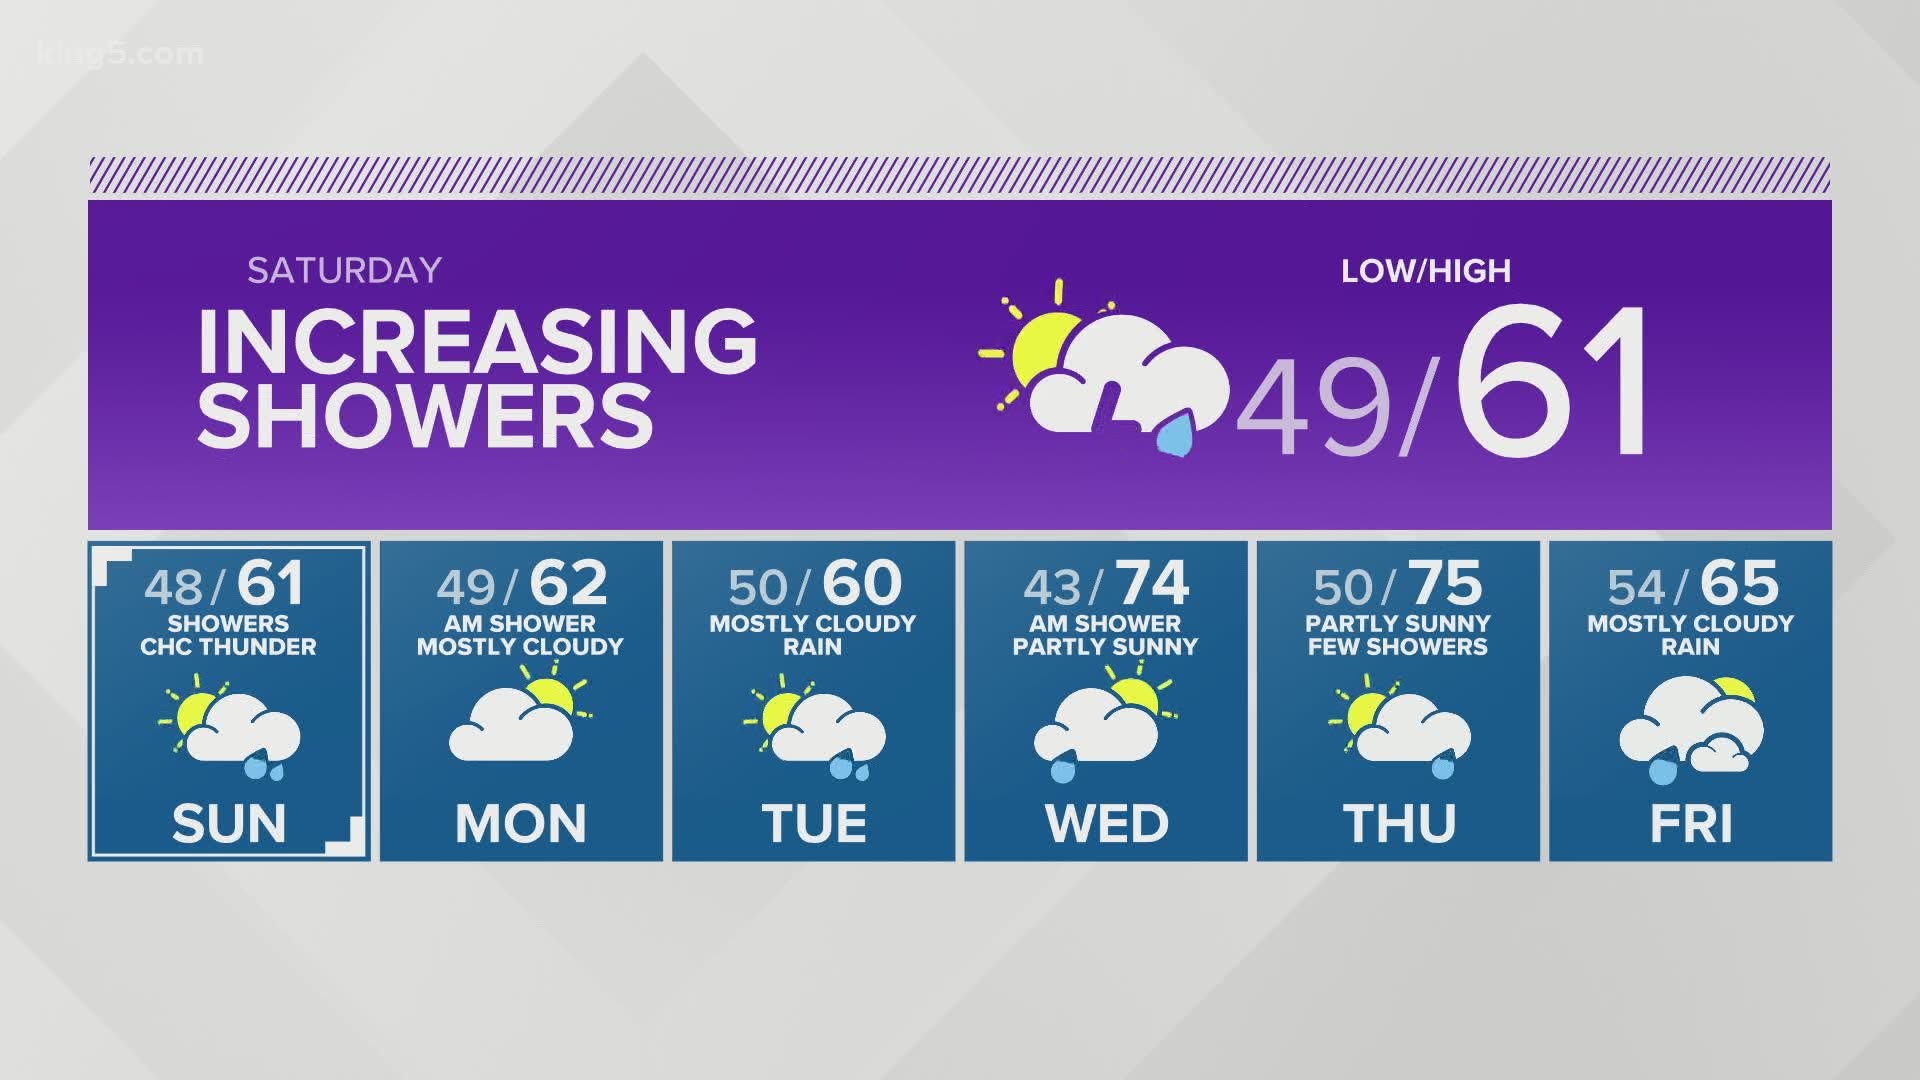 KING 5 late-evening weather with meteorologist Rebecca Stevenson June 5, 2020.